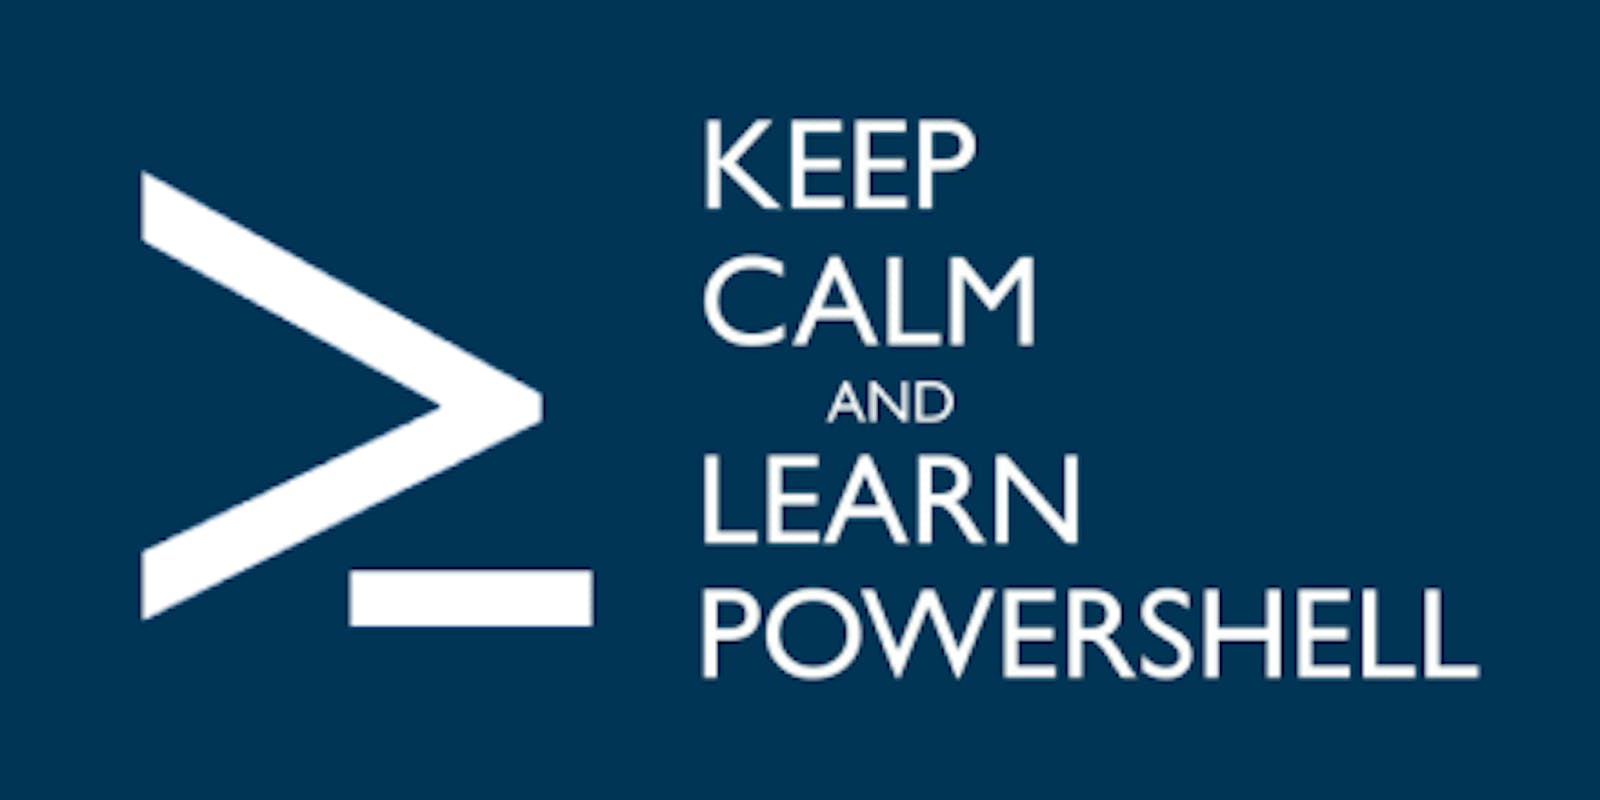 POWERSHELL: Get Path of Currently Executing Script